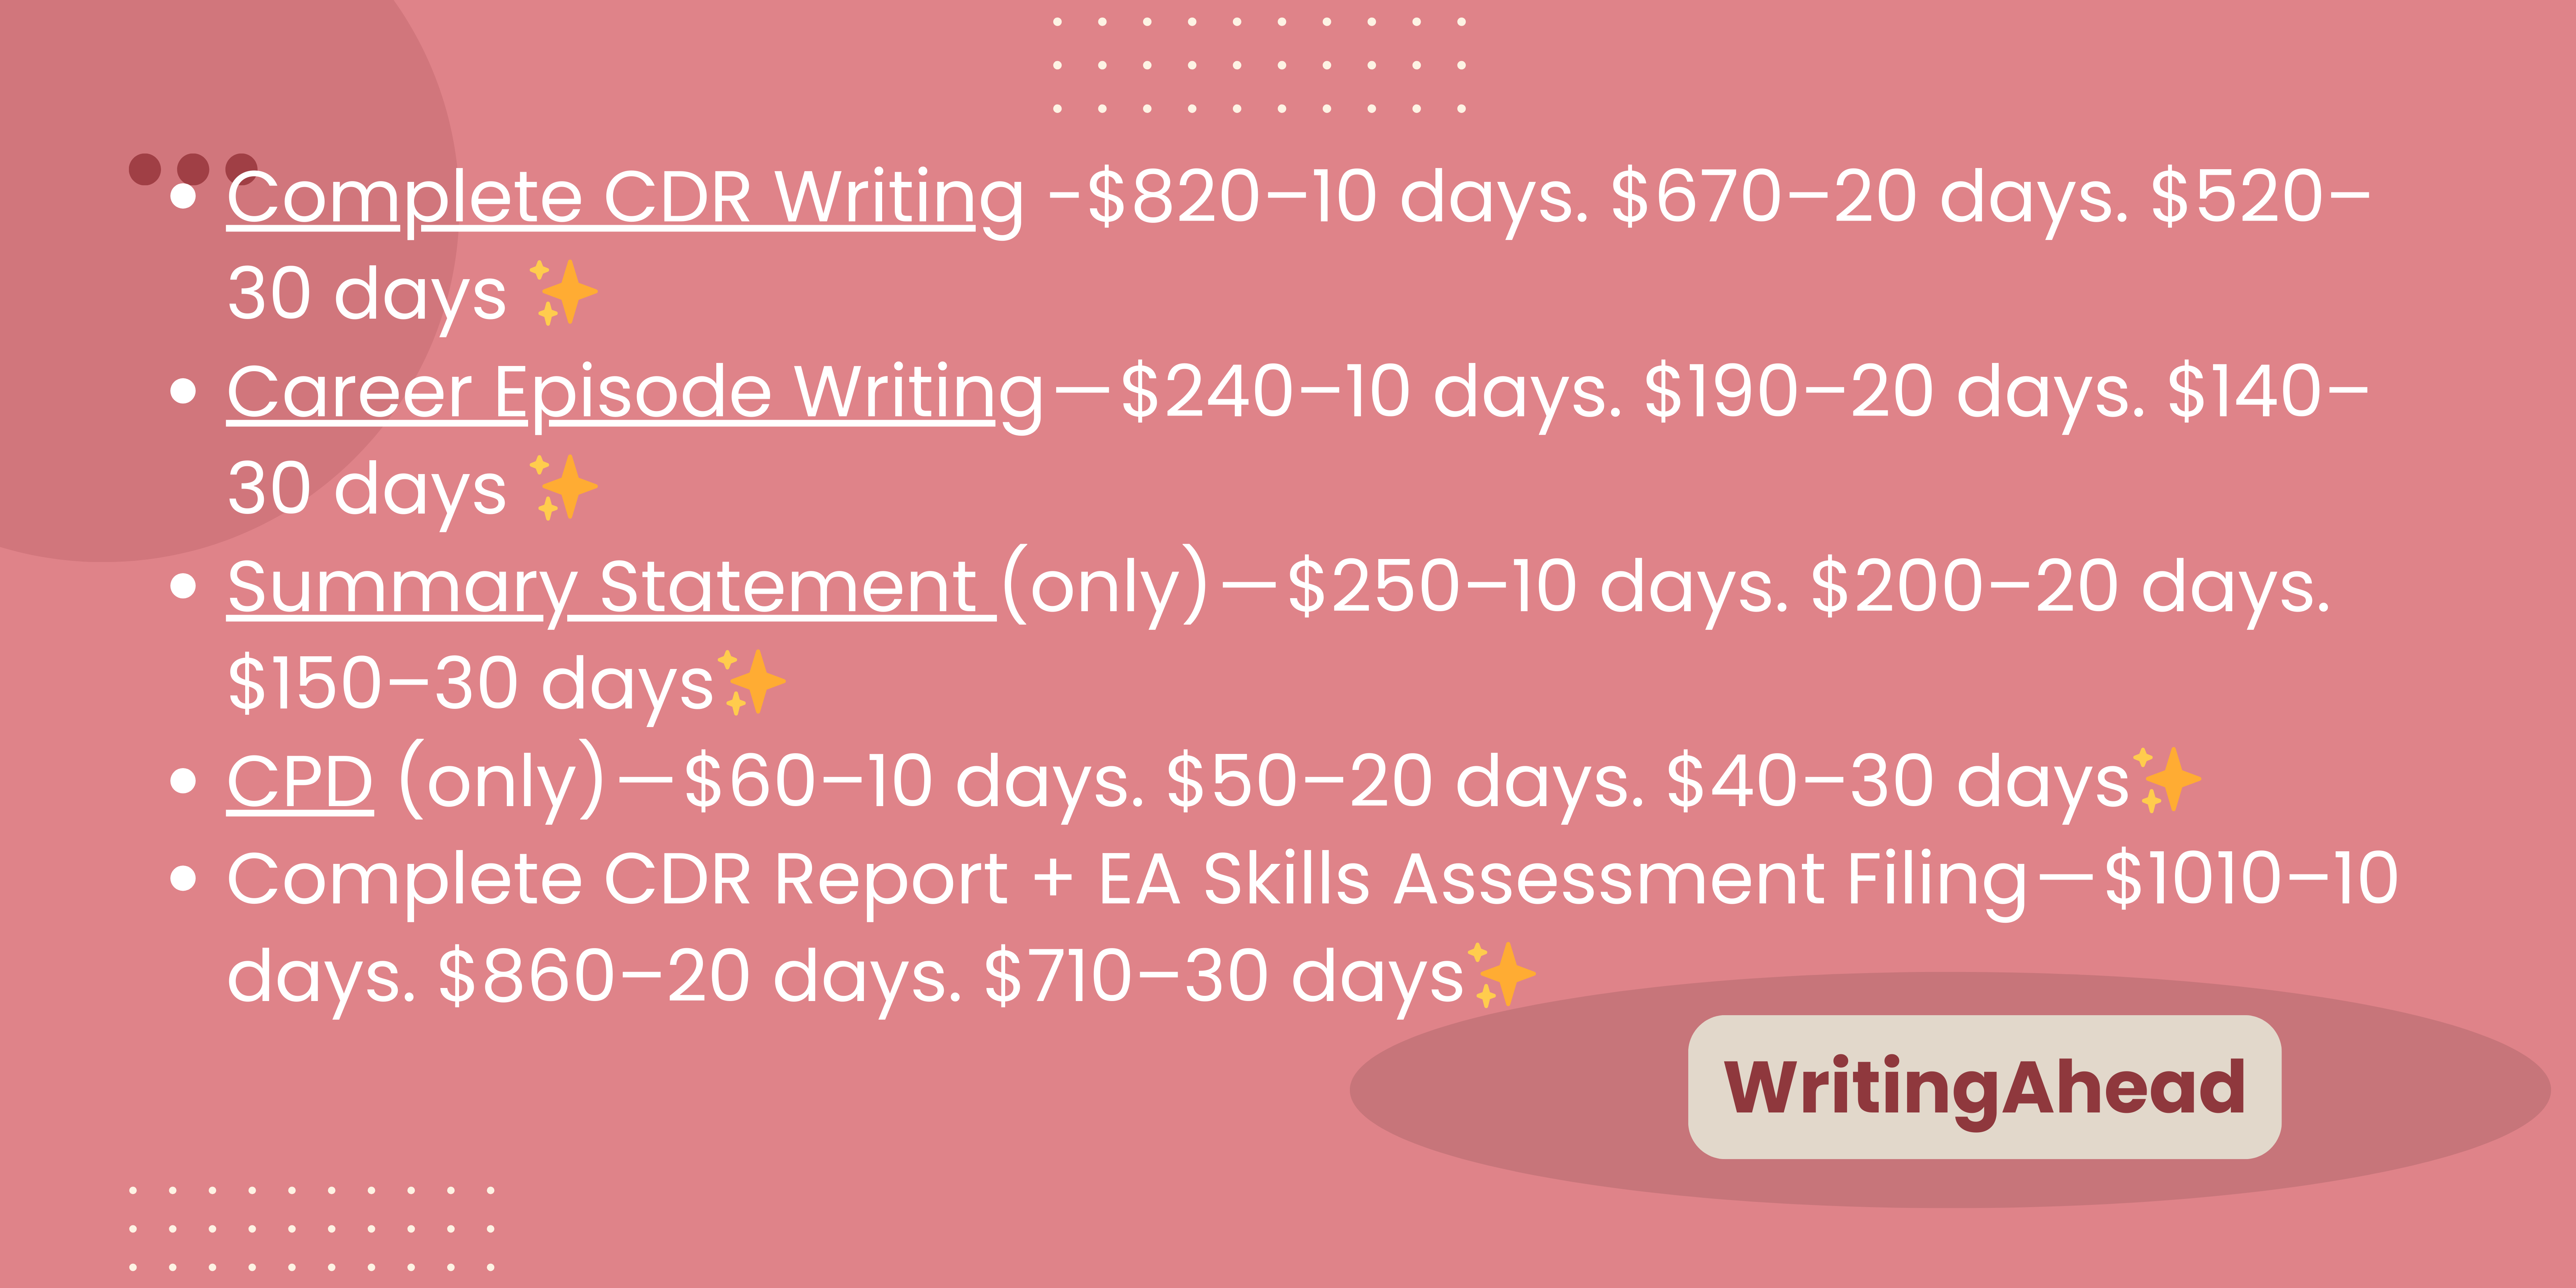 How to Choose the Best CDR Writing Service in Australia